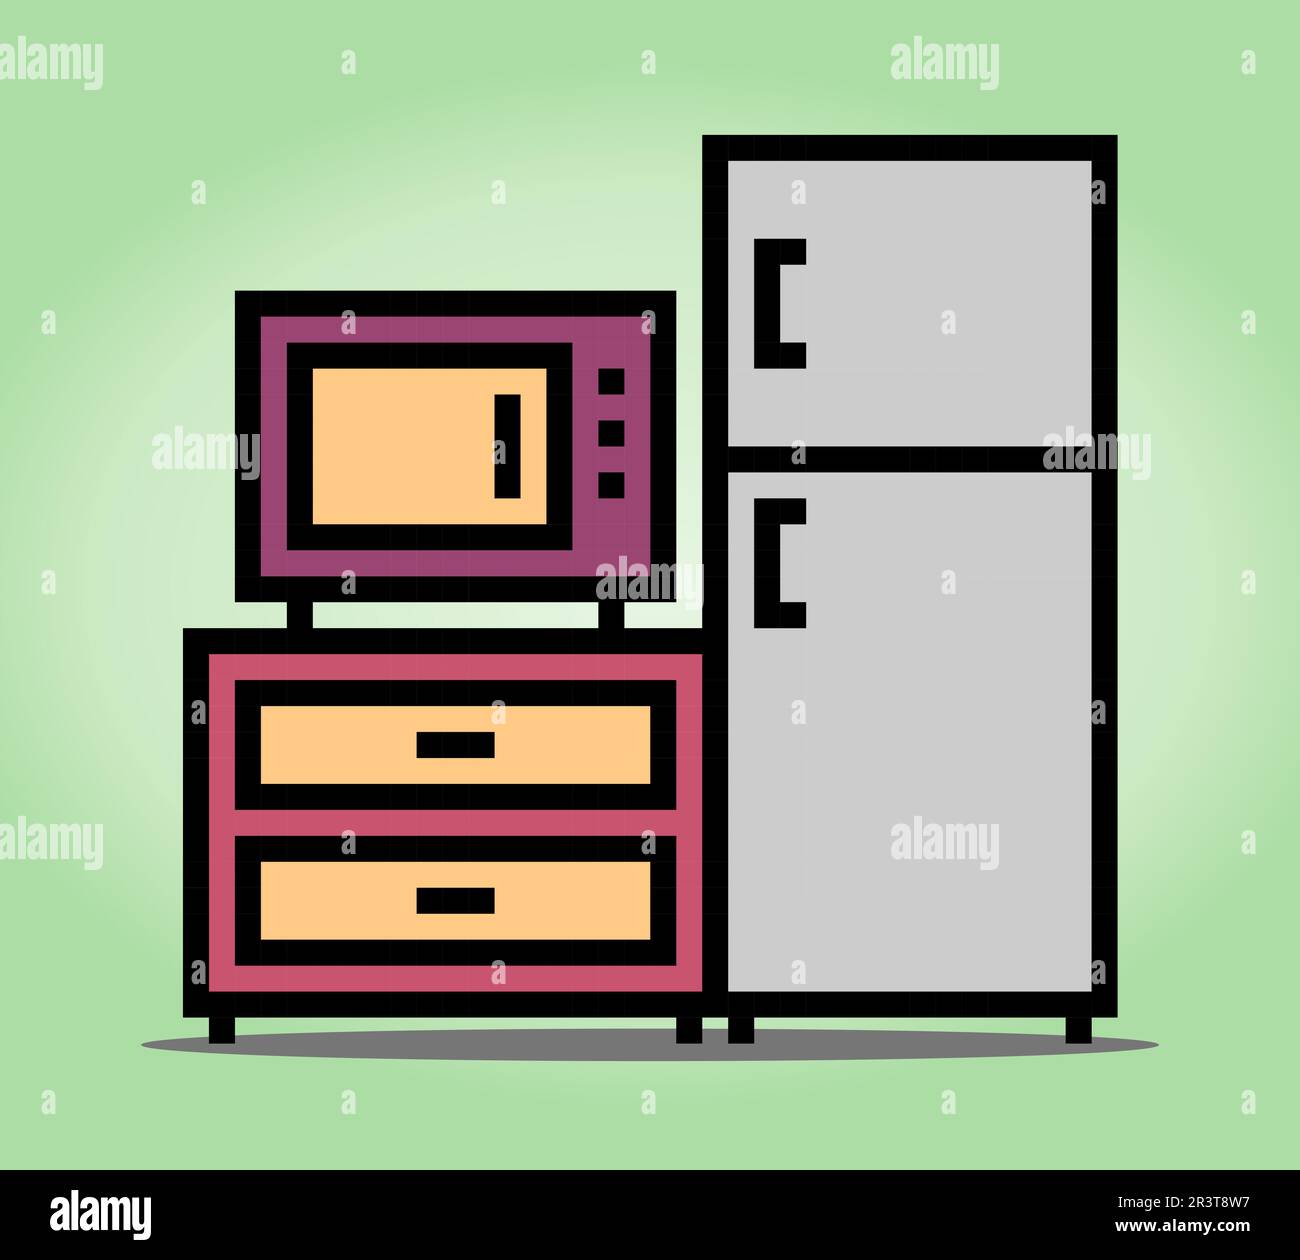 8 bit pixel Microwave, refrigerator and desk in vector illustrations for game assets. Kitchen electronic tool in Pixel Art. Stock Vector